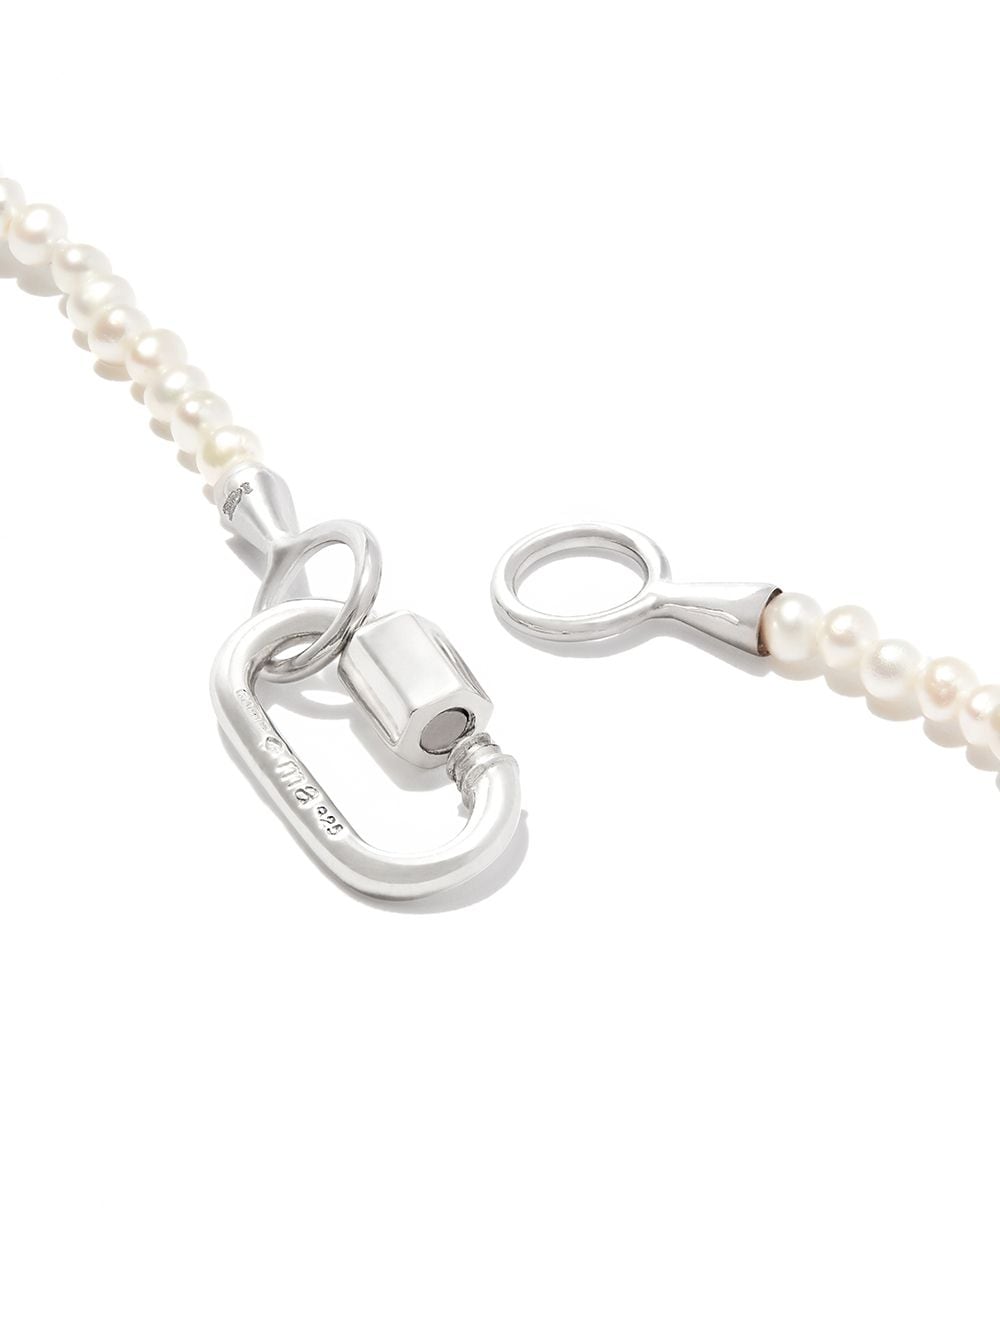 Marla Aaron 14kt White Gold Baby Lock Pearl Necklace - Farfetch